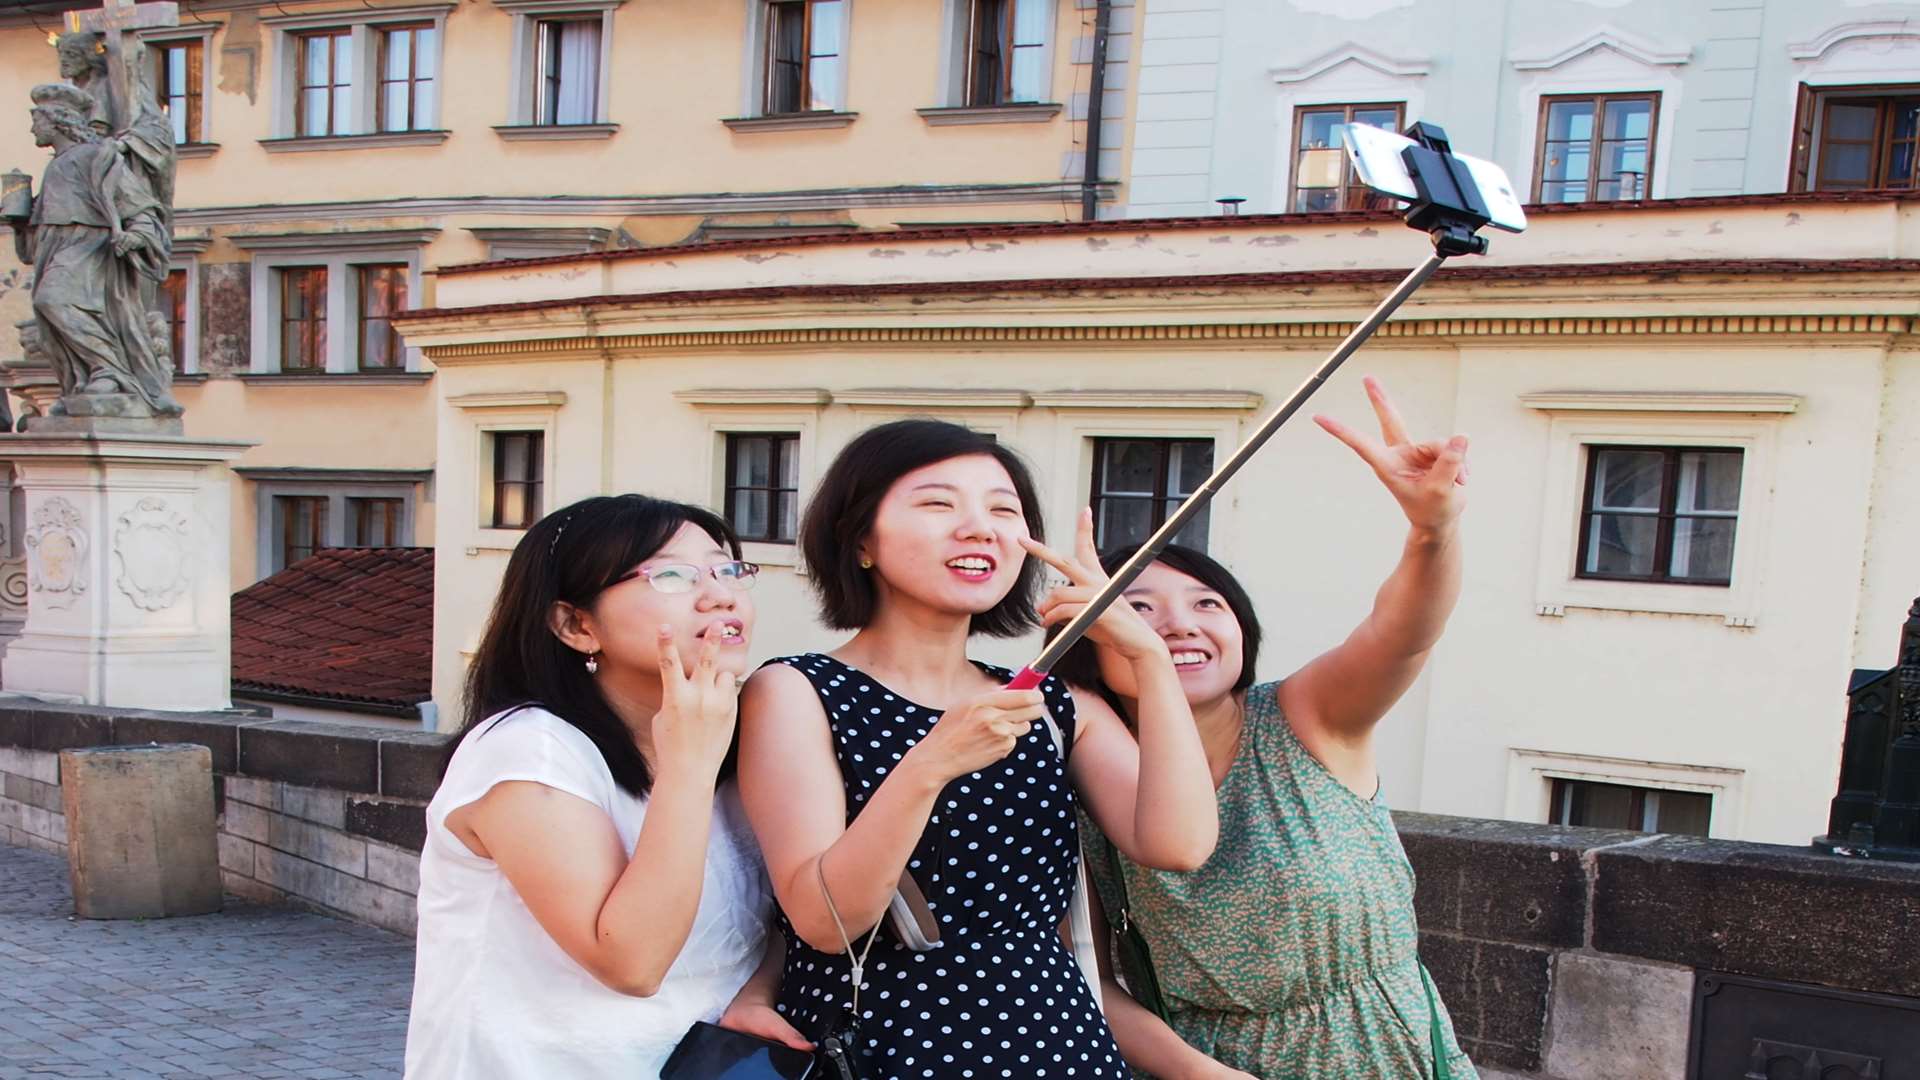 The metal sticks are used to take self portraits or "selfies"